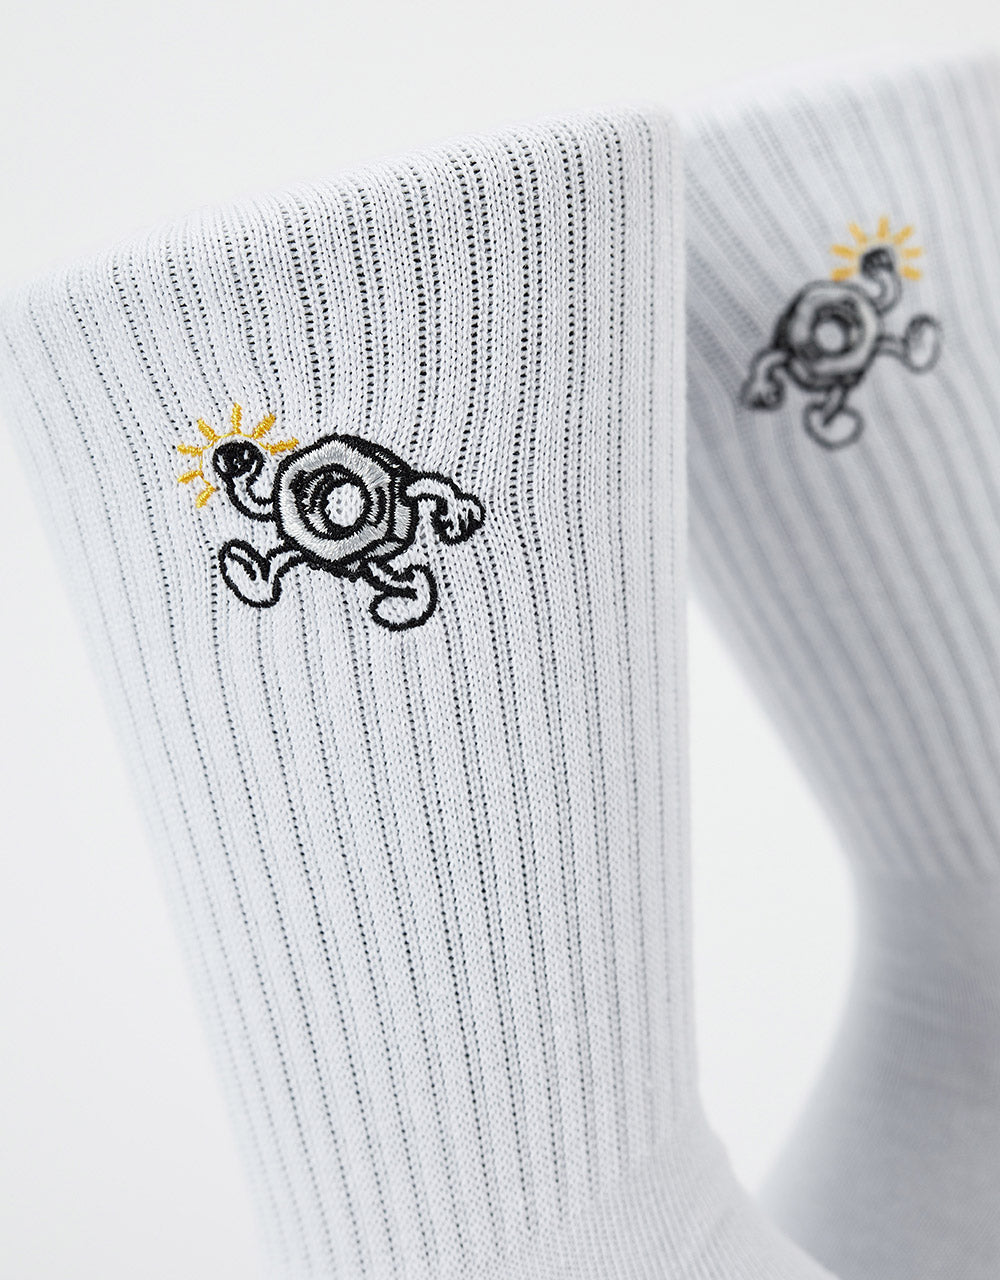 Route One Nuts Socks - White